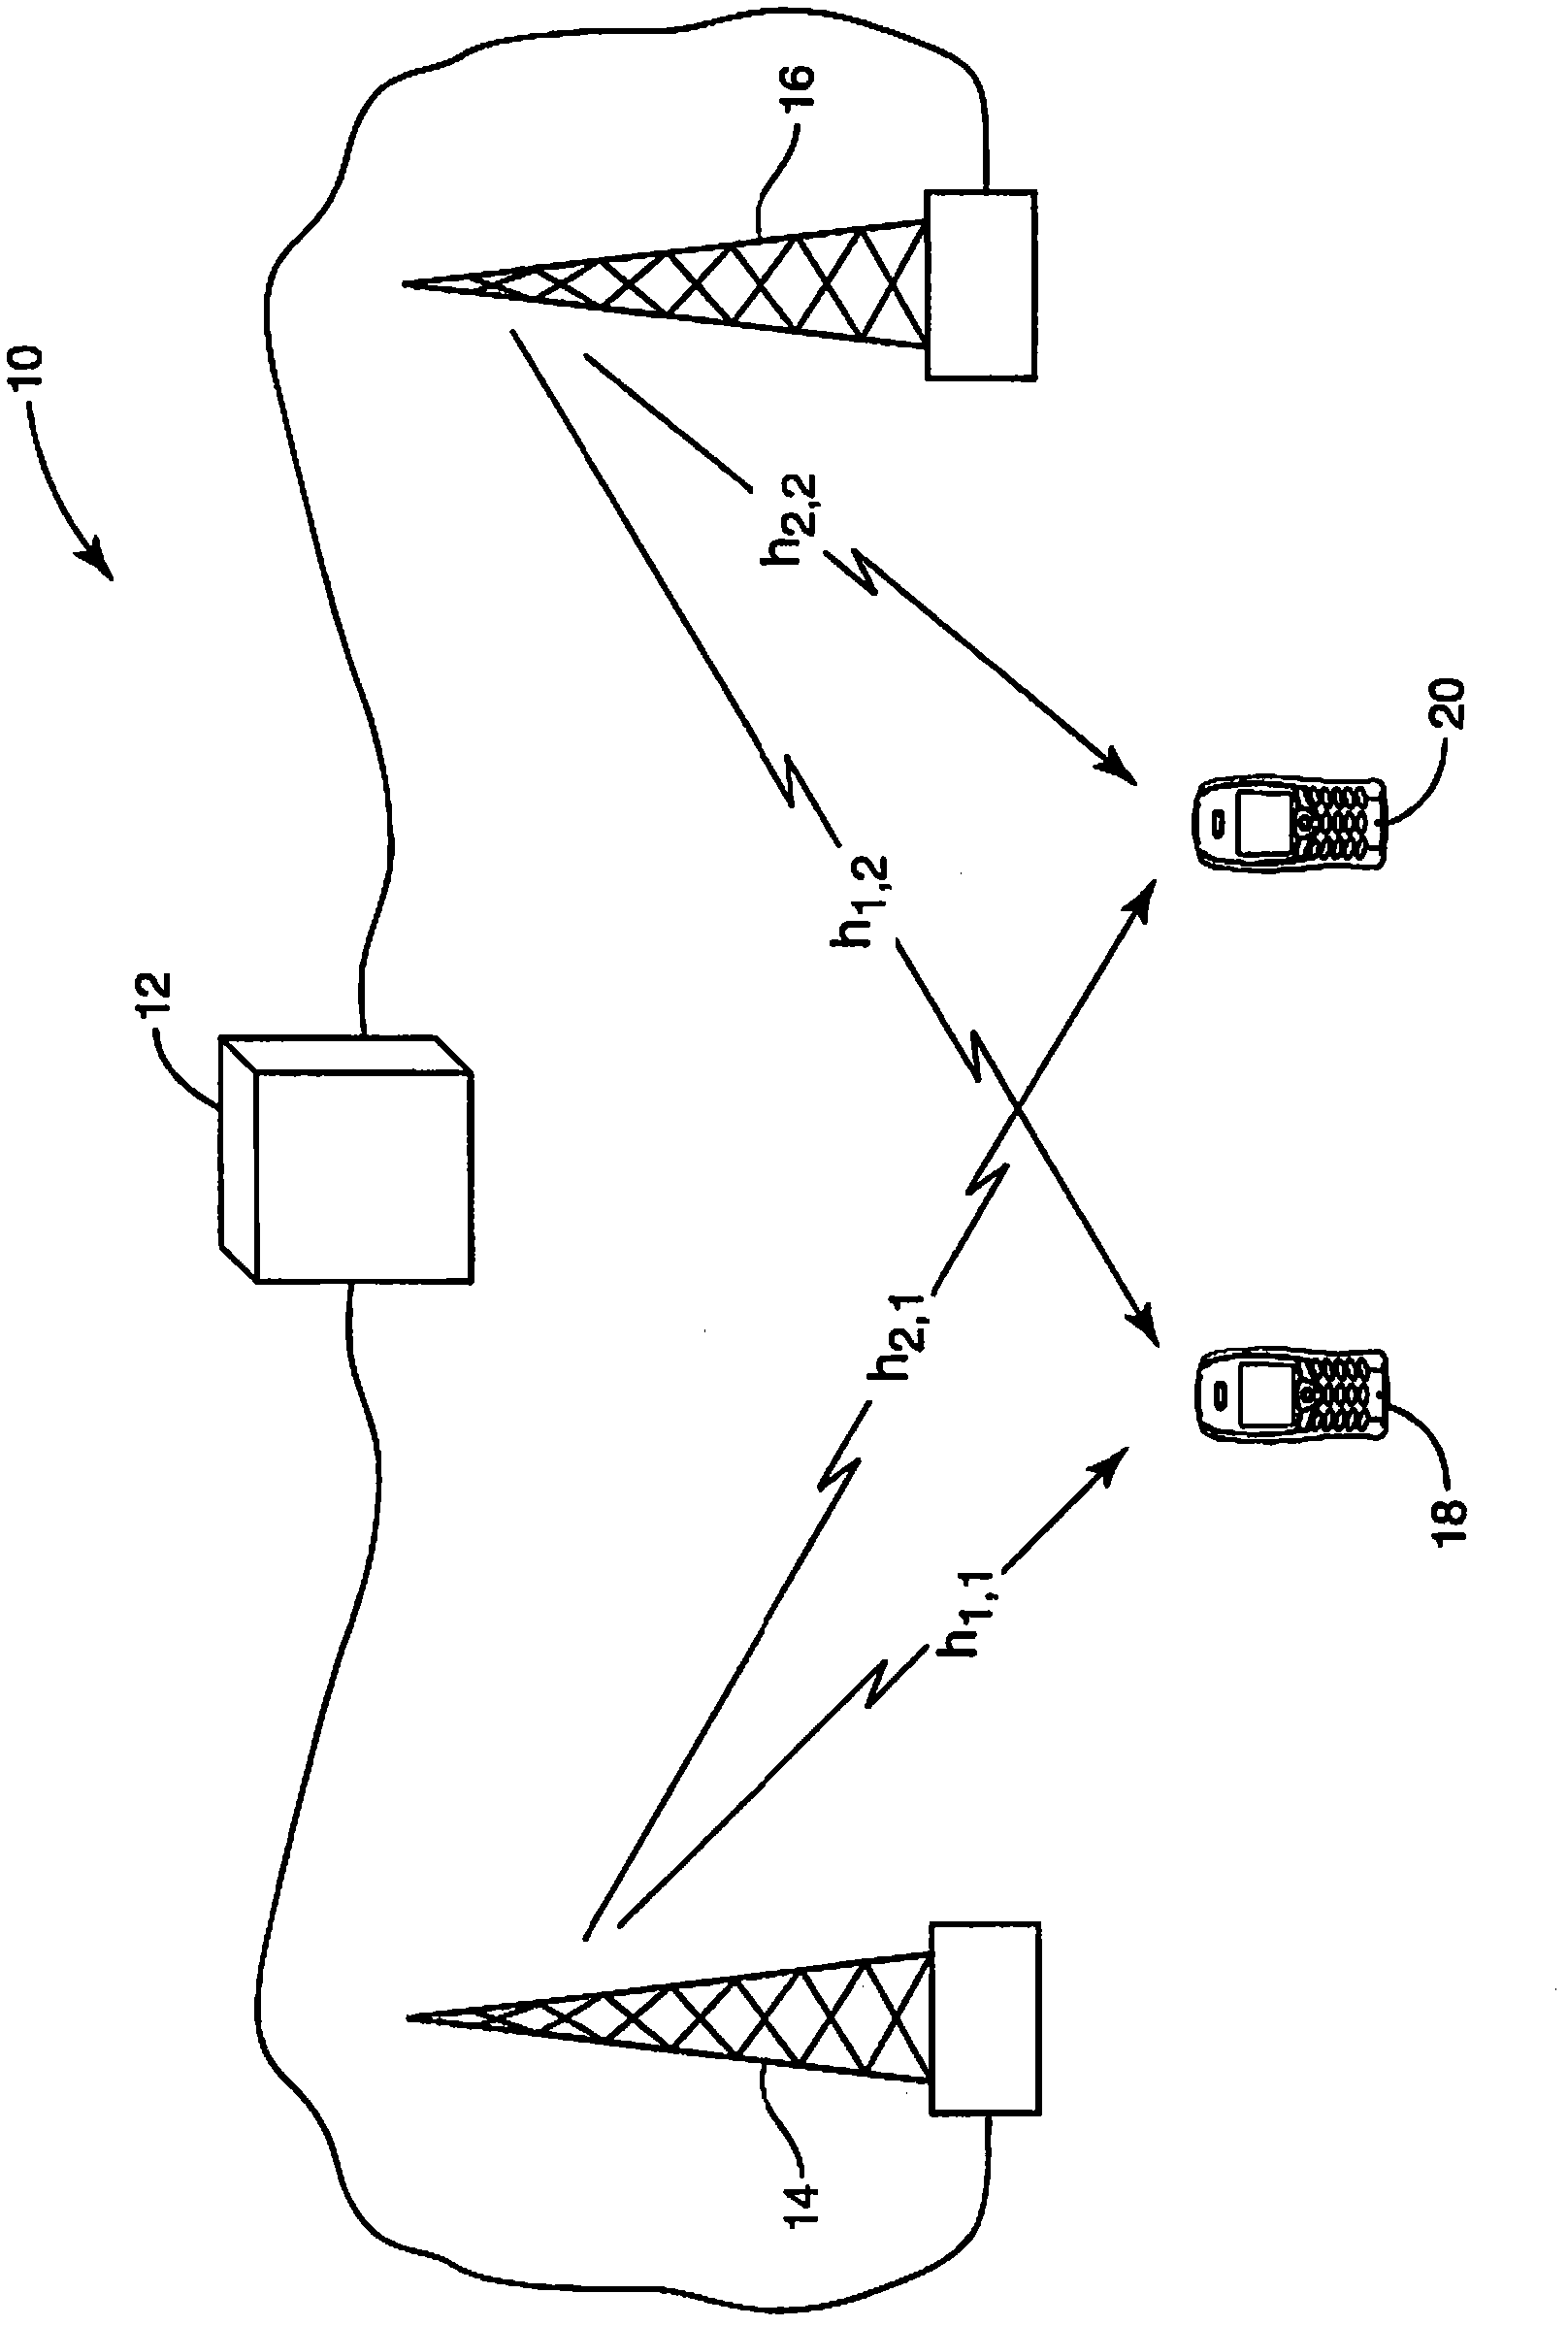 Coordinated multipoint transmission/reception user grouping